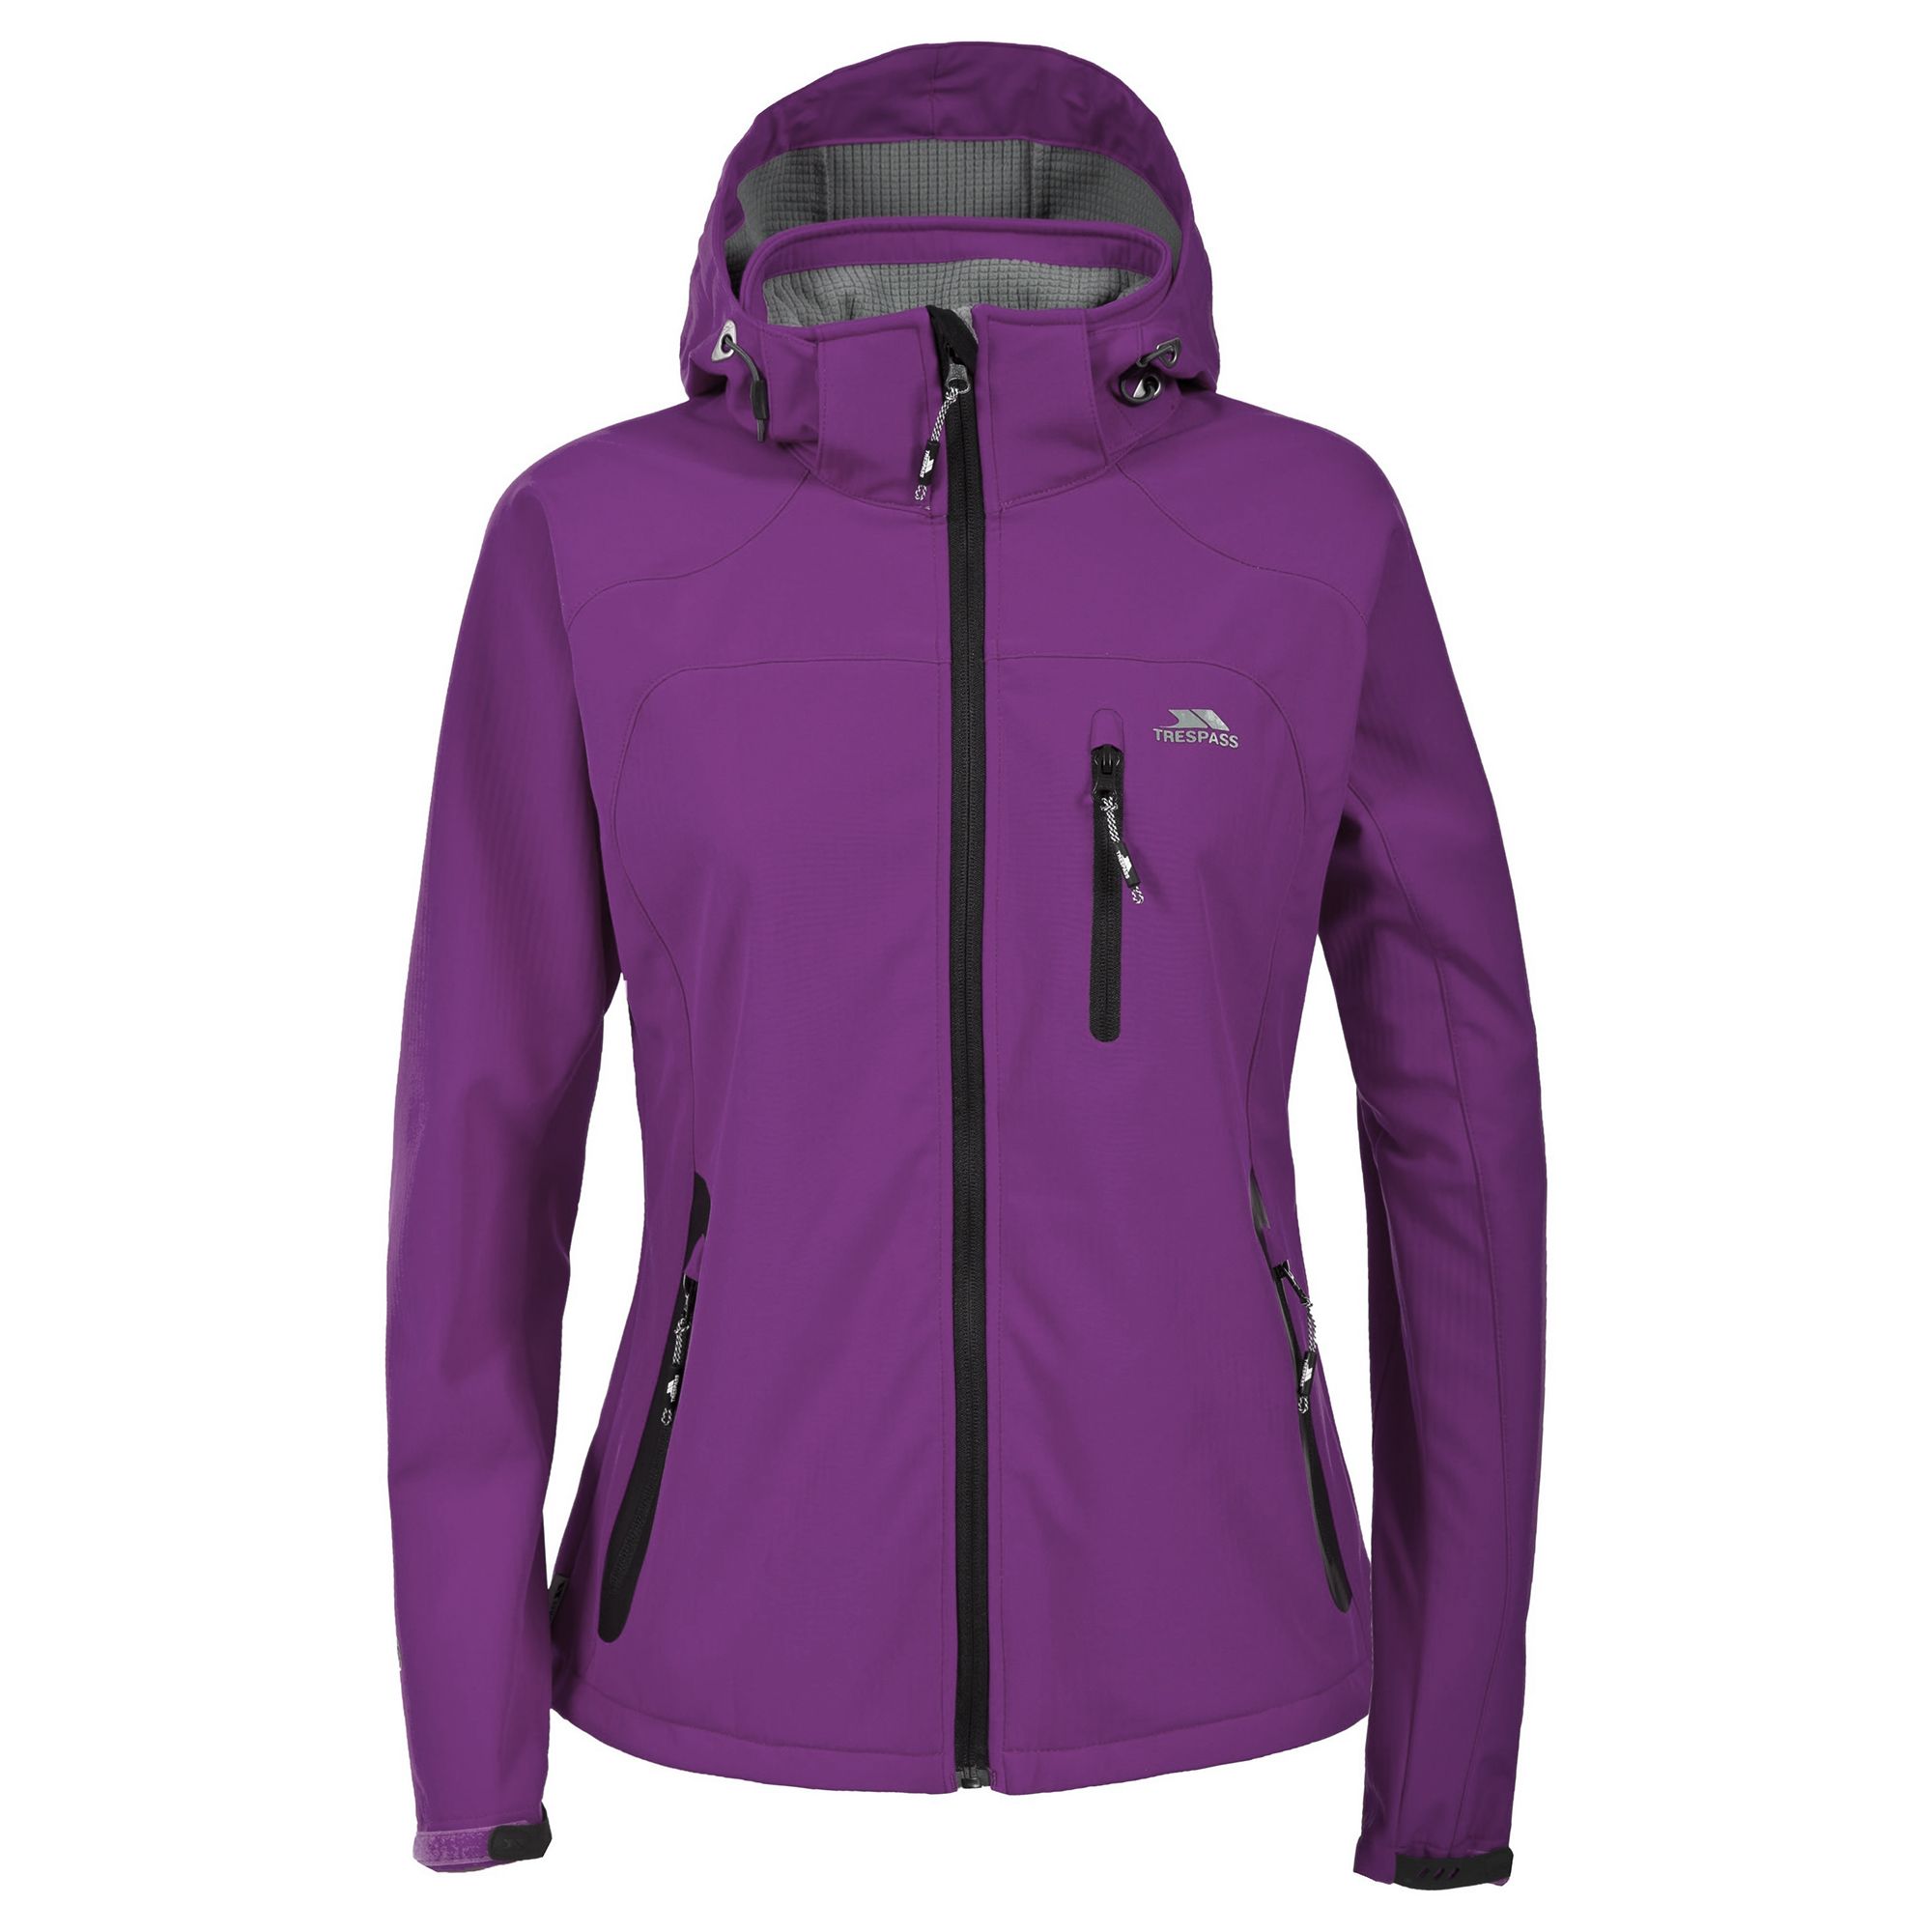 Ladies windproof softshell jacket. Water Resistant 8000mm and Breathable 3000mvp. Adjustable zip off hood. 3 low profile zip pockets. Flat cuff with touch fastening tab. Chin guard. Drawcord at hem. 94% Polyester, 6% Elastane.